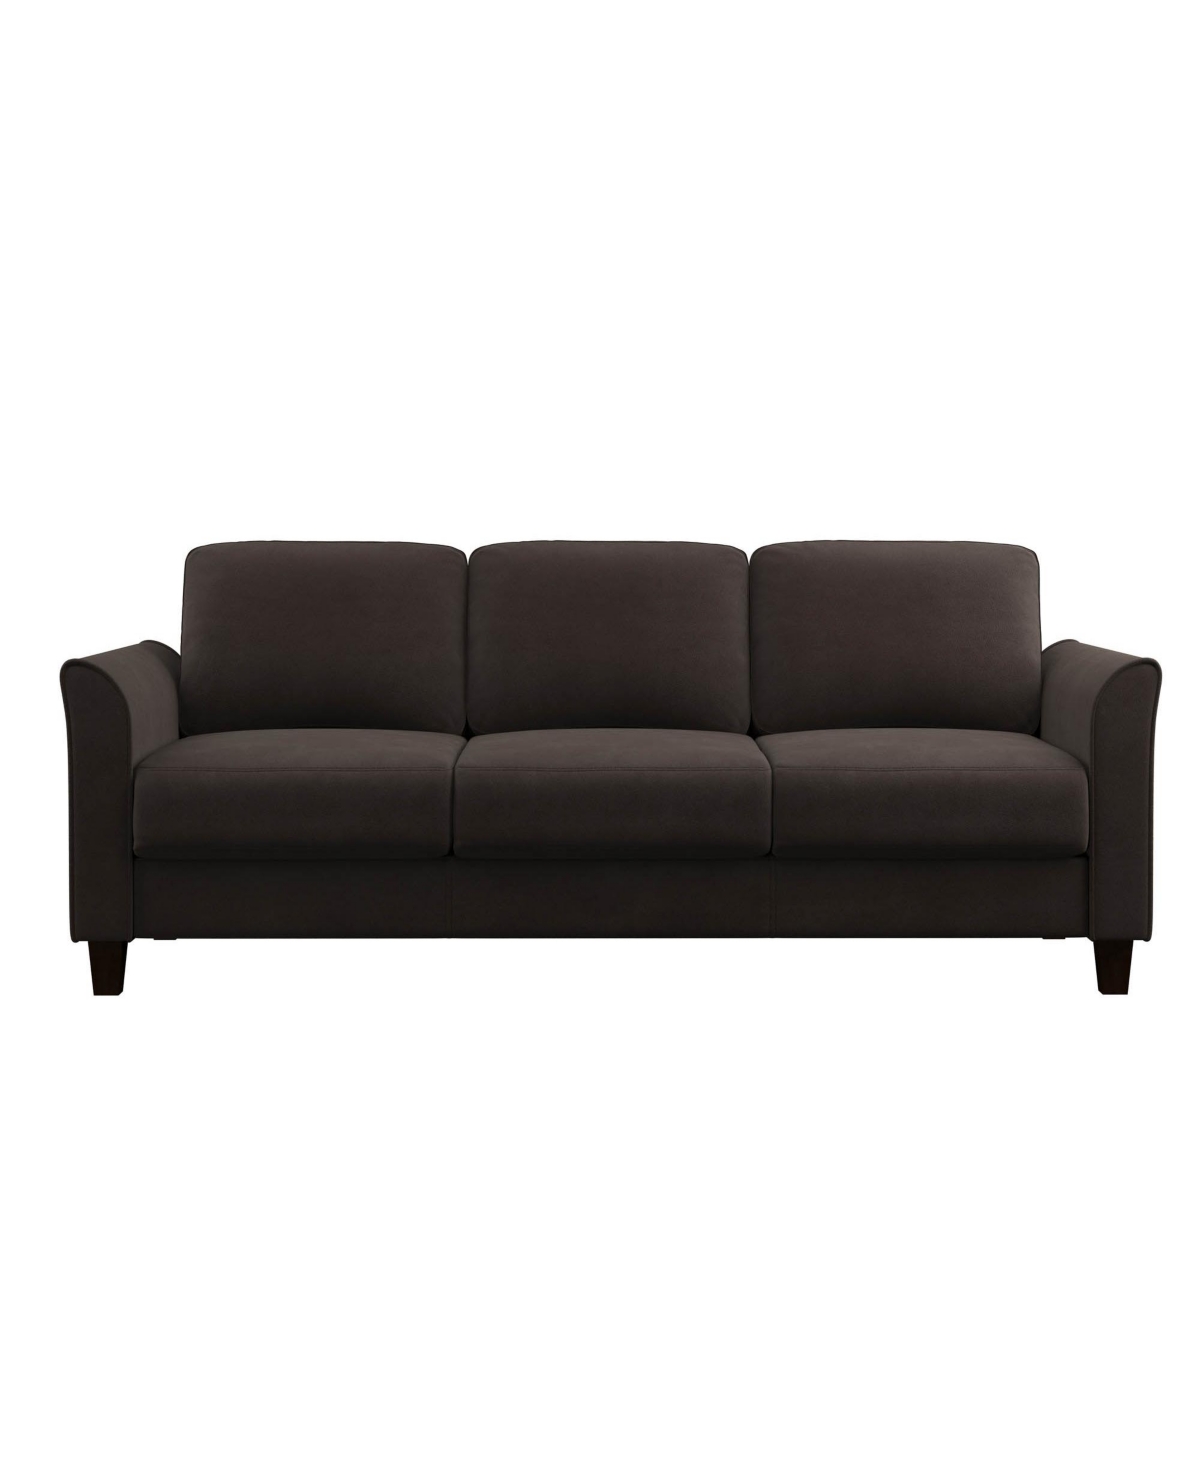 Lifestyle Solutions Wilshire Sofa With Curved Arms In Coffee